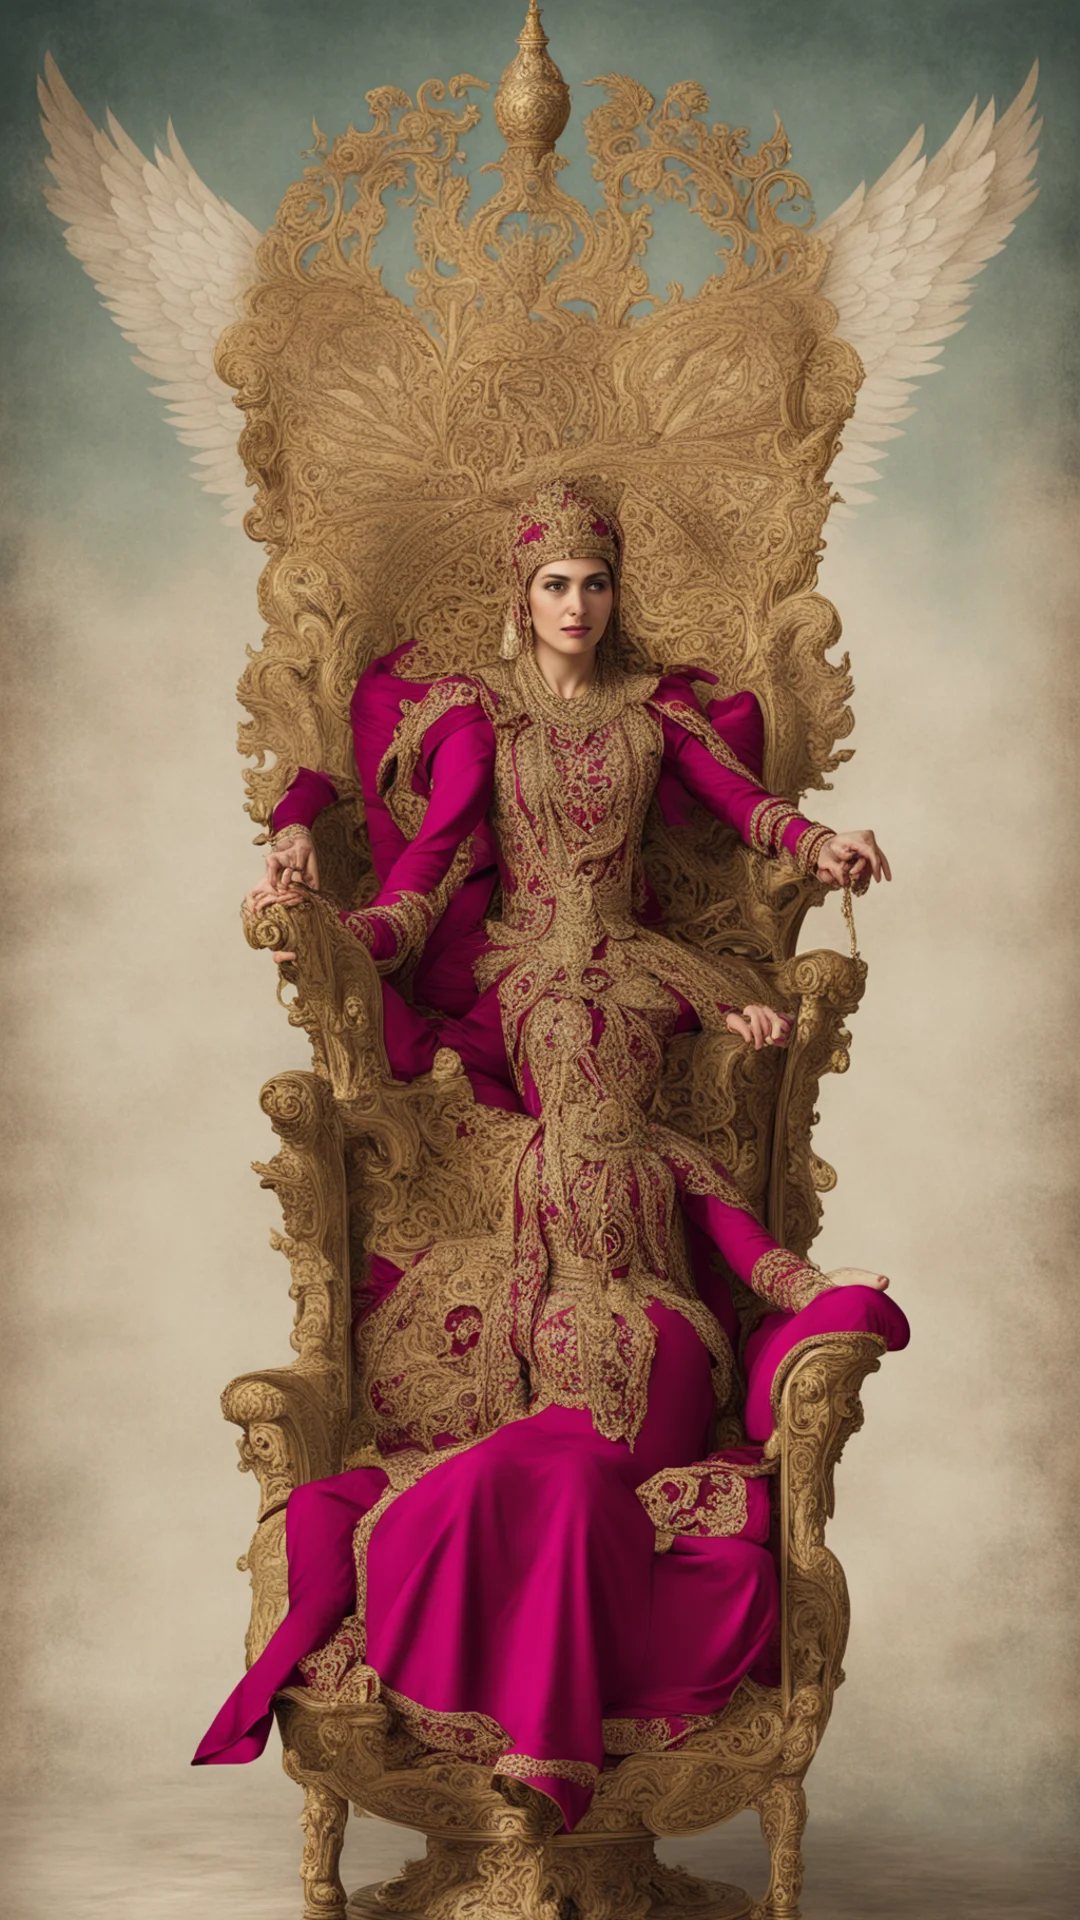 aiottoman princess sitting on a flying throne  amazing awesome portrait 2 tall